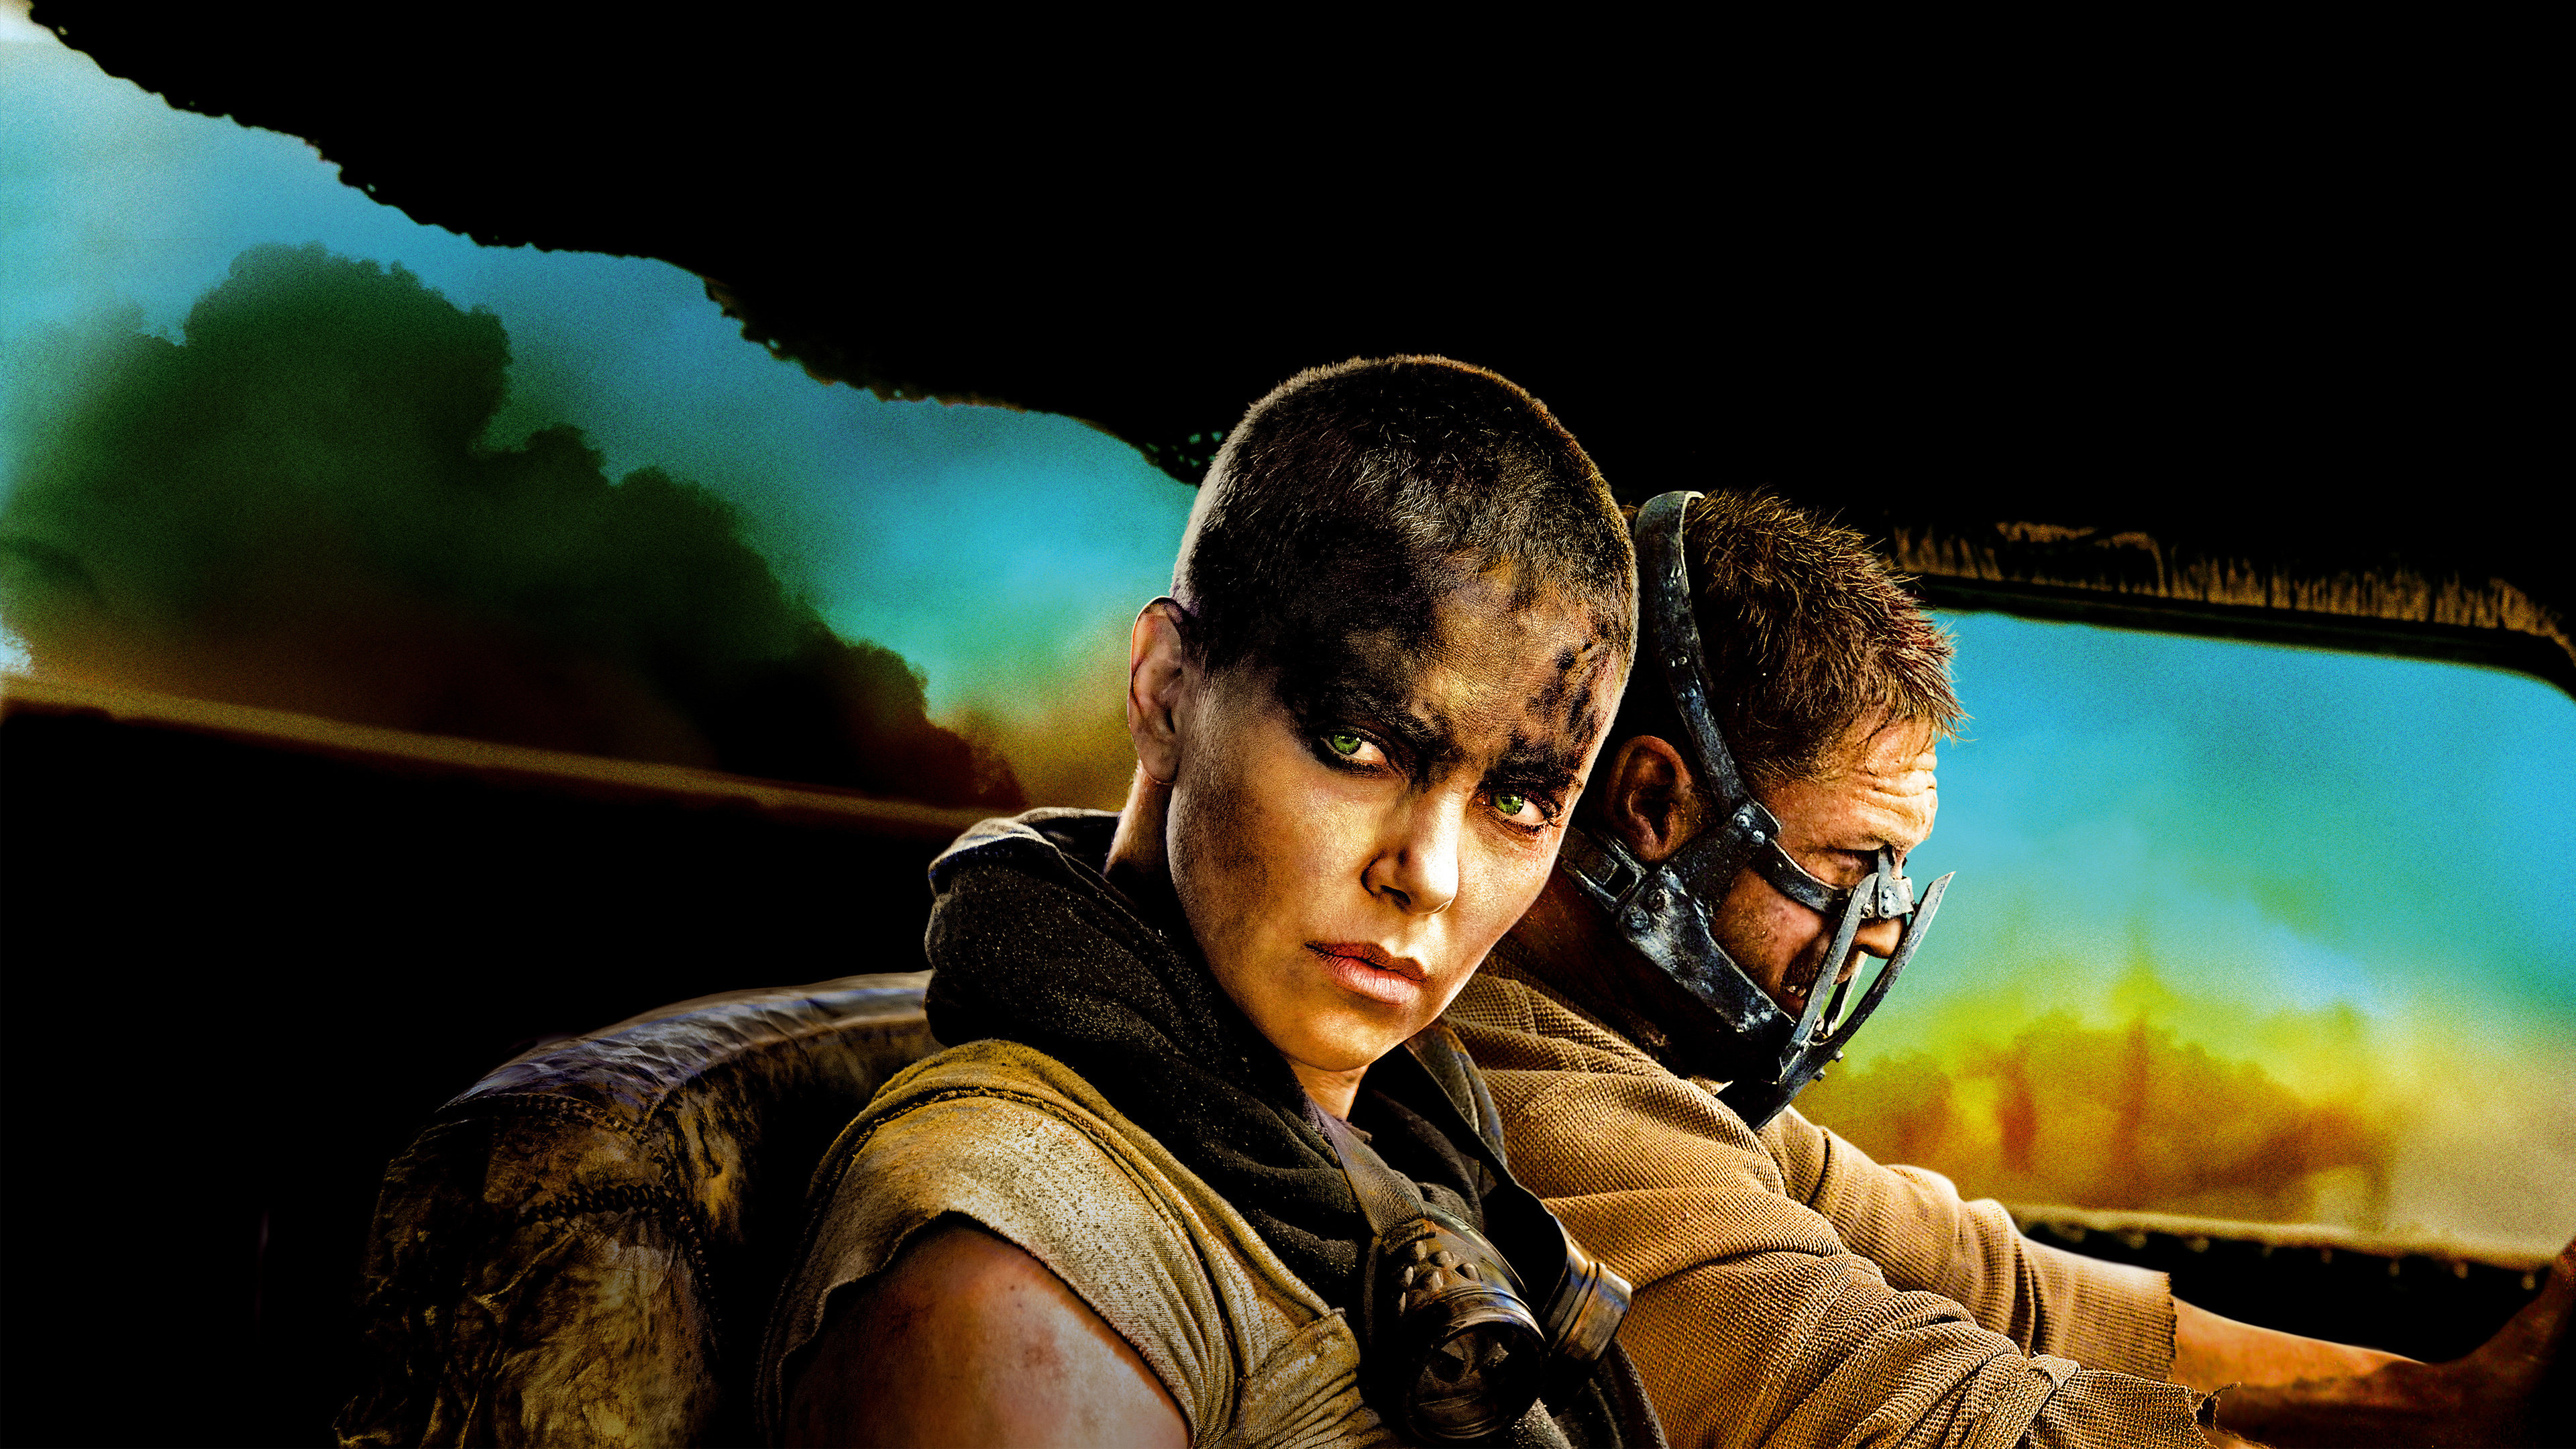 Mad Max: A 2015 Australian post-apocalyptic action film, Charlize Theron as Imperator Furiosa. 3840x2160 4K Wallpaper.